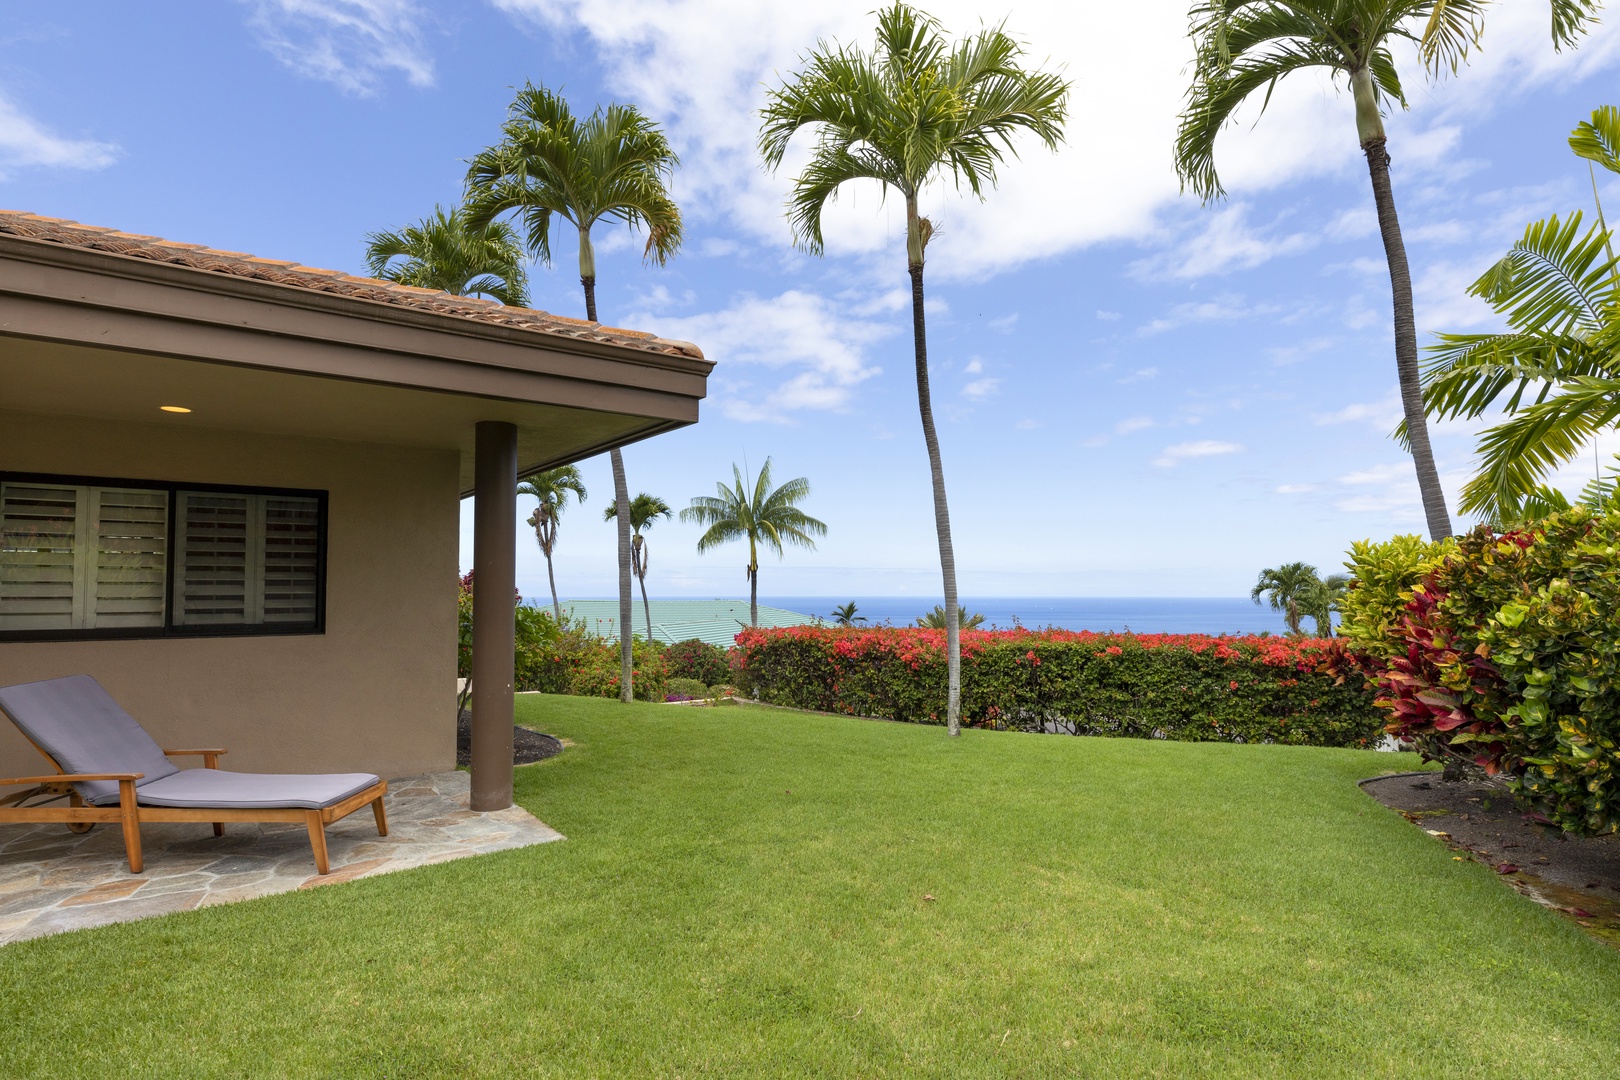 Enjoy serenity and ocean views from the backyard